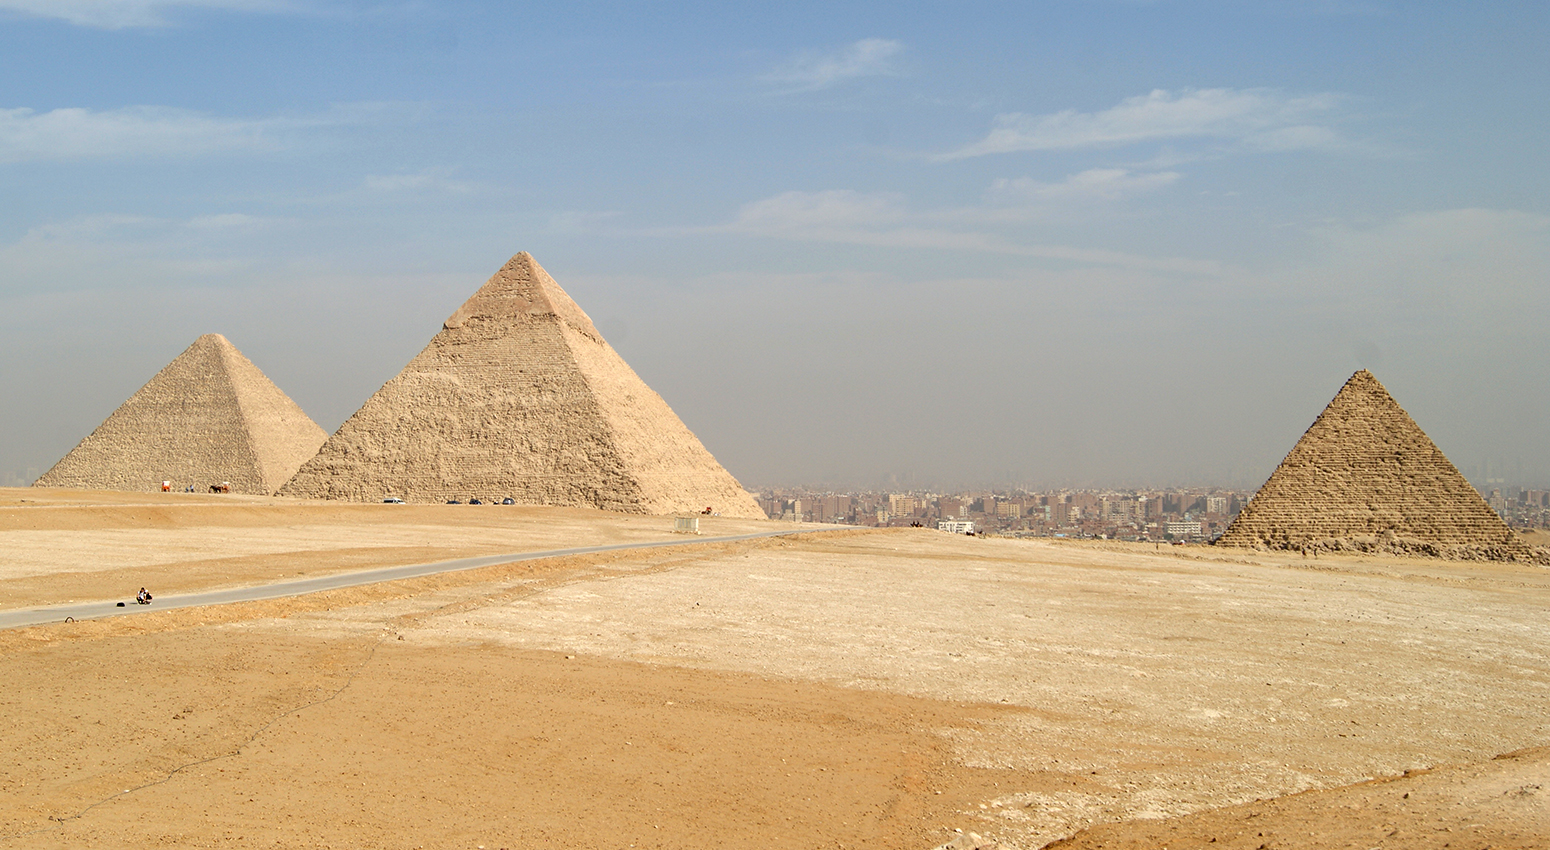 The ancient pyramids in Egypt